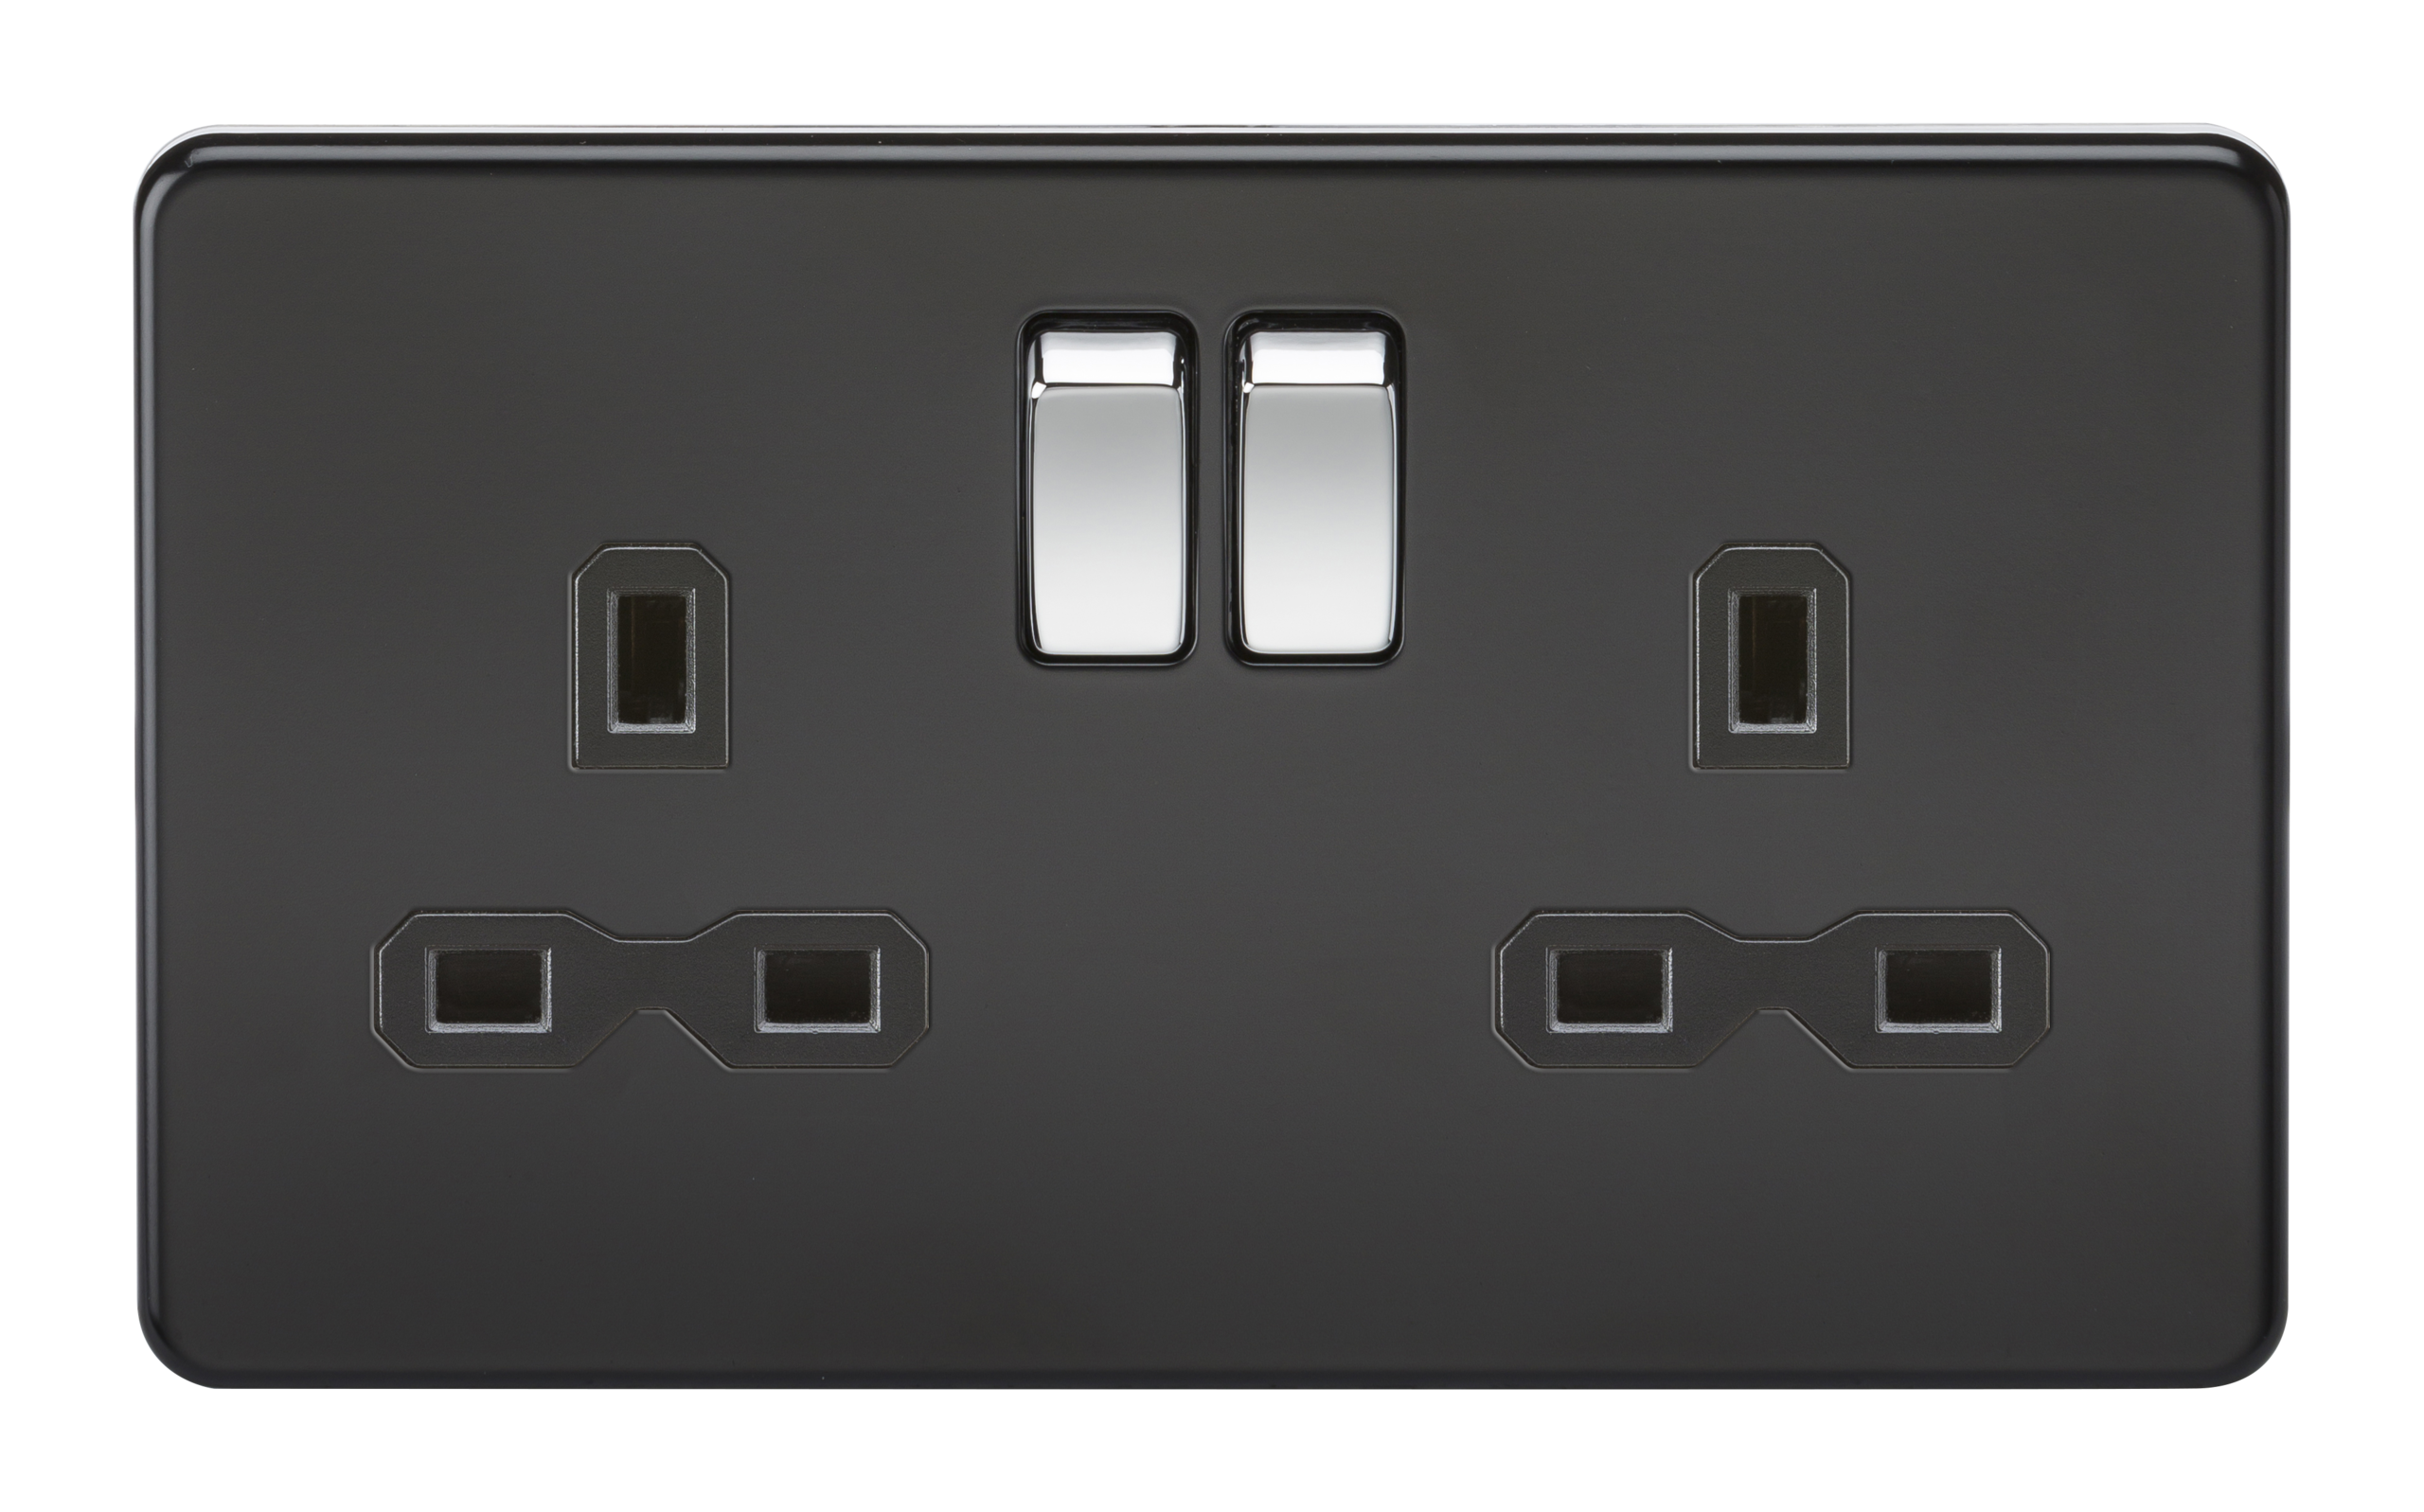 Screwless 13A 2G DP Switched Socket - Matt Black With Black Insert And Chrome Rockers - SFR9000MB 